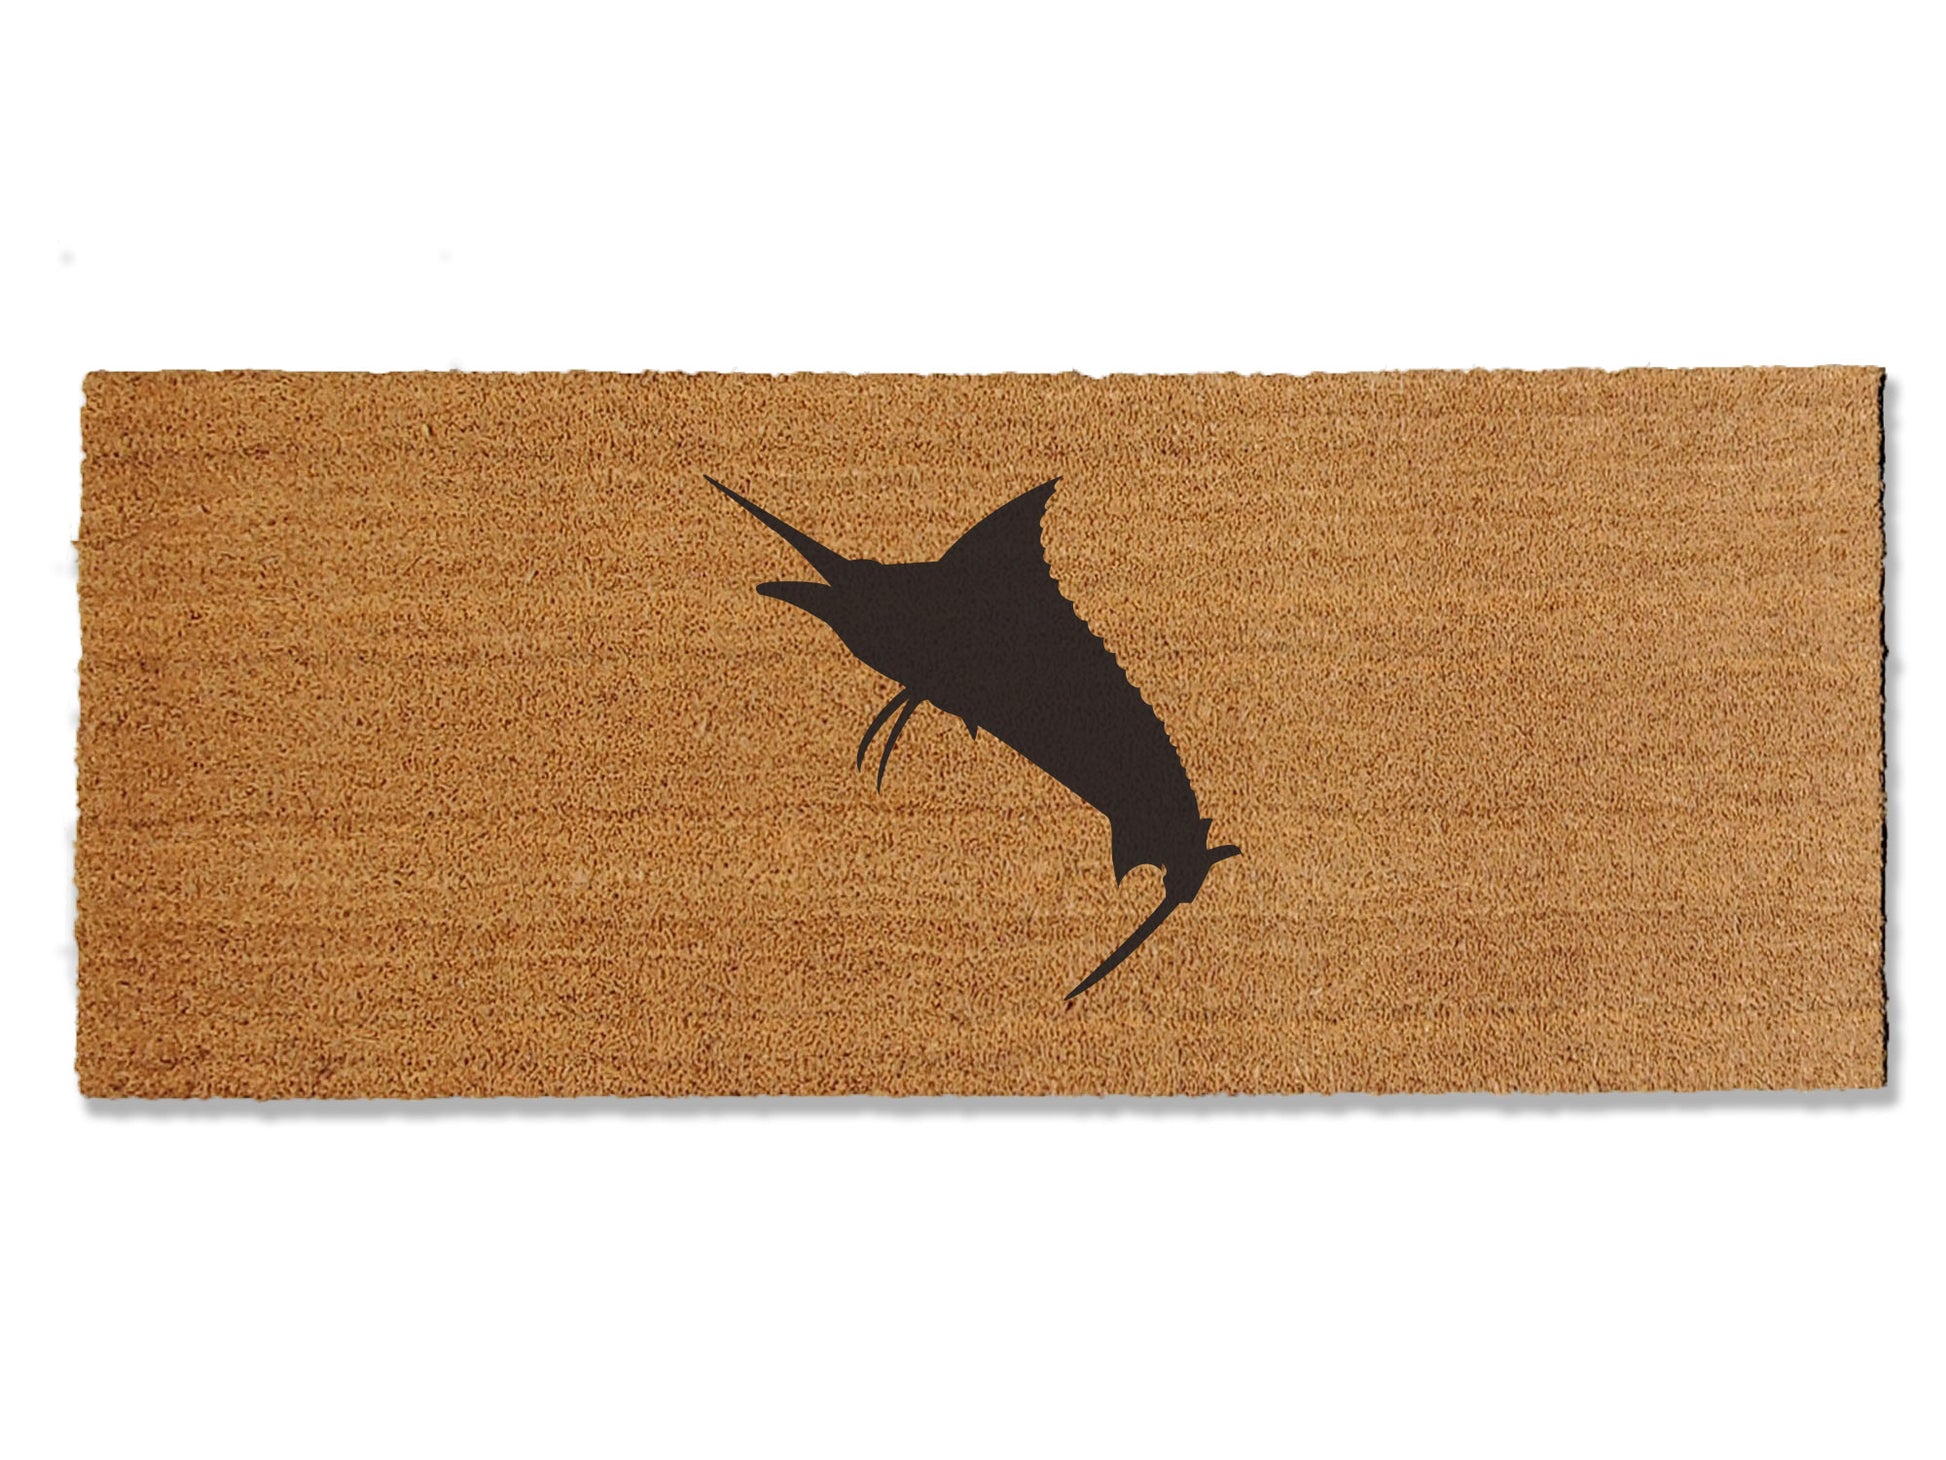 Deck out the entryway with our coir doormat designed for the avid saltwater fisherman, featuring a striking marlin. Available in multiple sizes, this thoughtful mat is an ideal Father's Day gift, adding a touch of nautical charm to welcome guests while effectively trapping dirt.